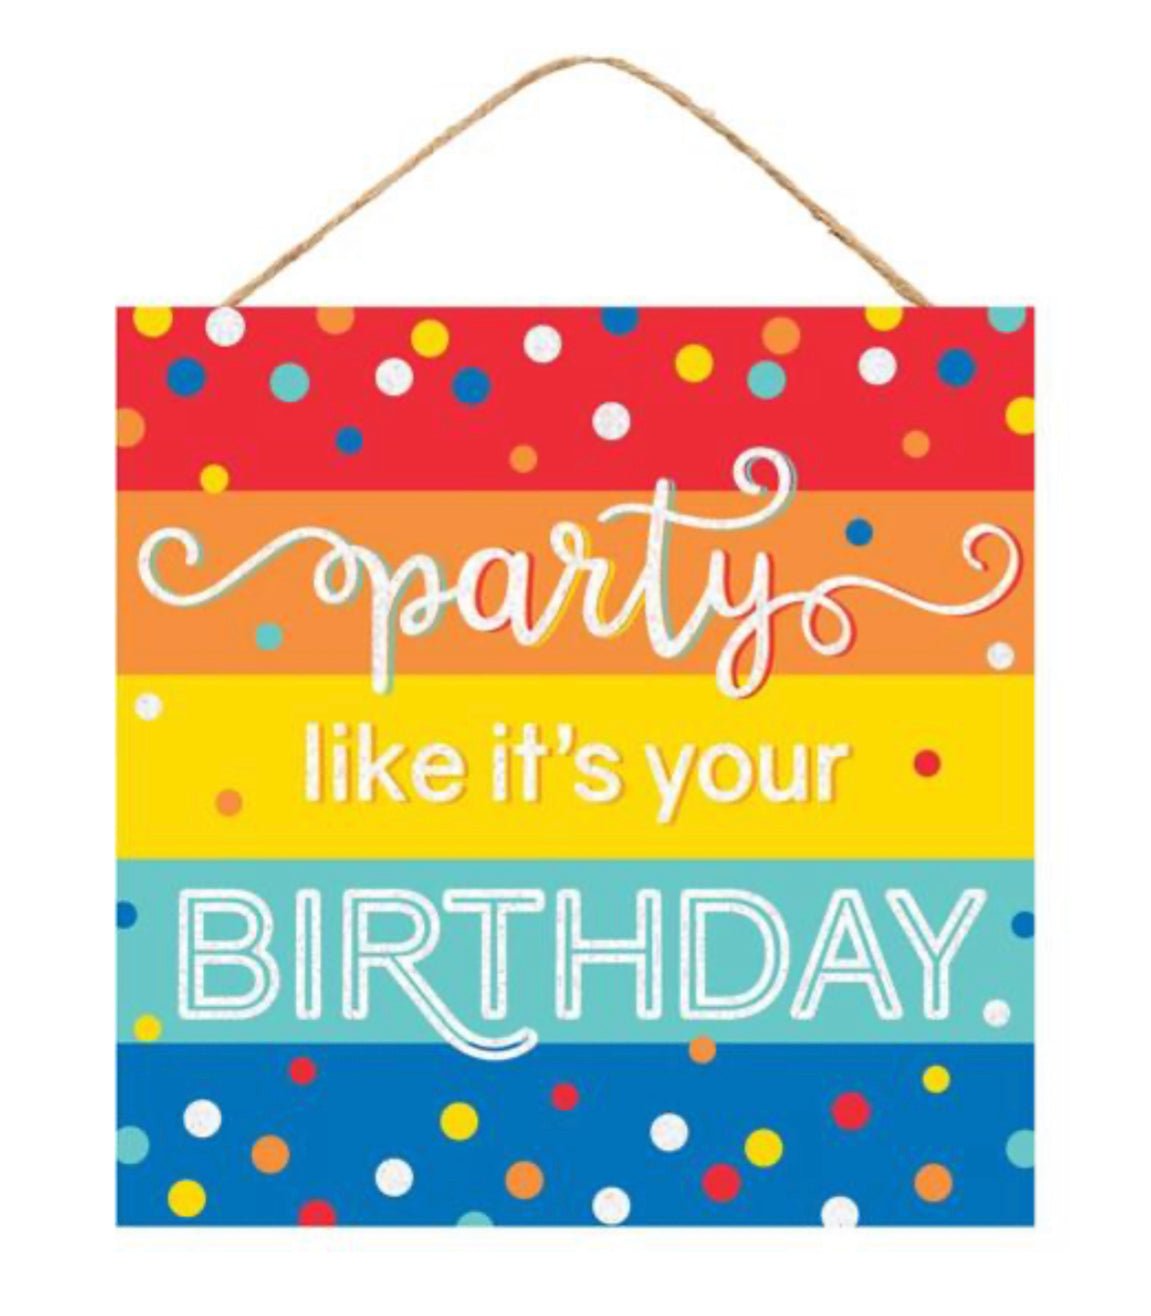 Birthday party square sign - Greenery Marketsigns for wreathsAP783062